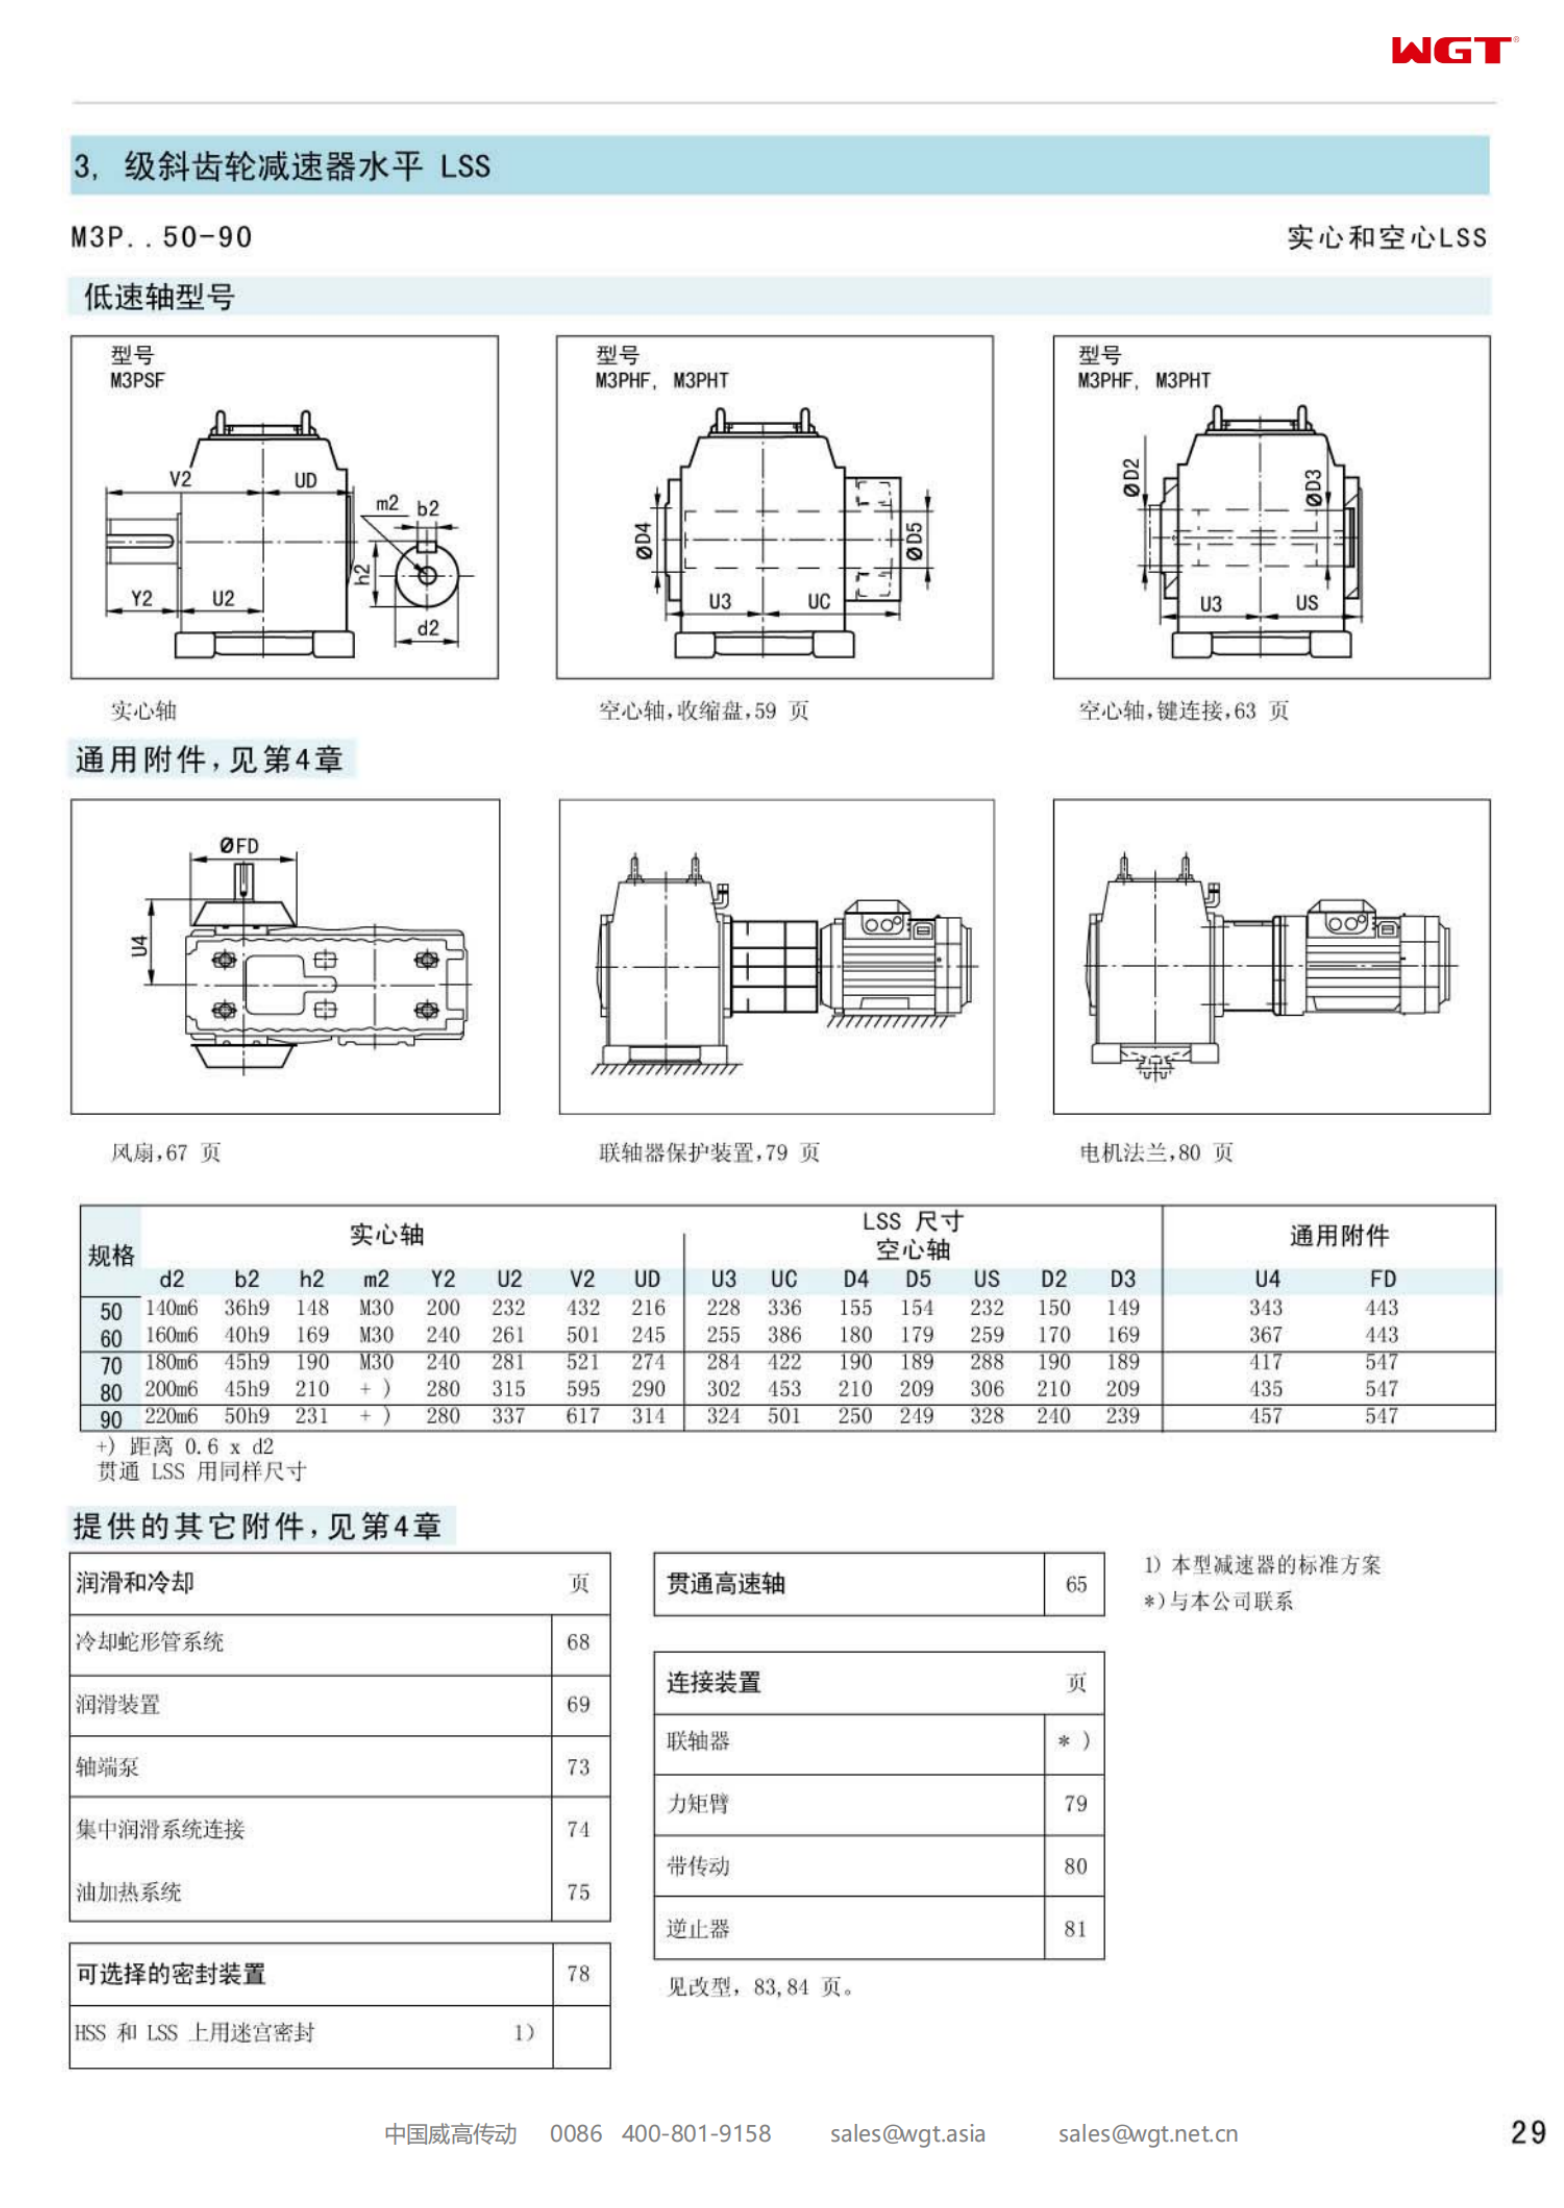 M3PHF90 Replace_SEW_M_Series Gearbox